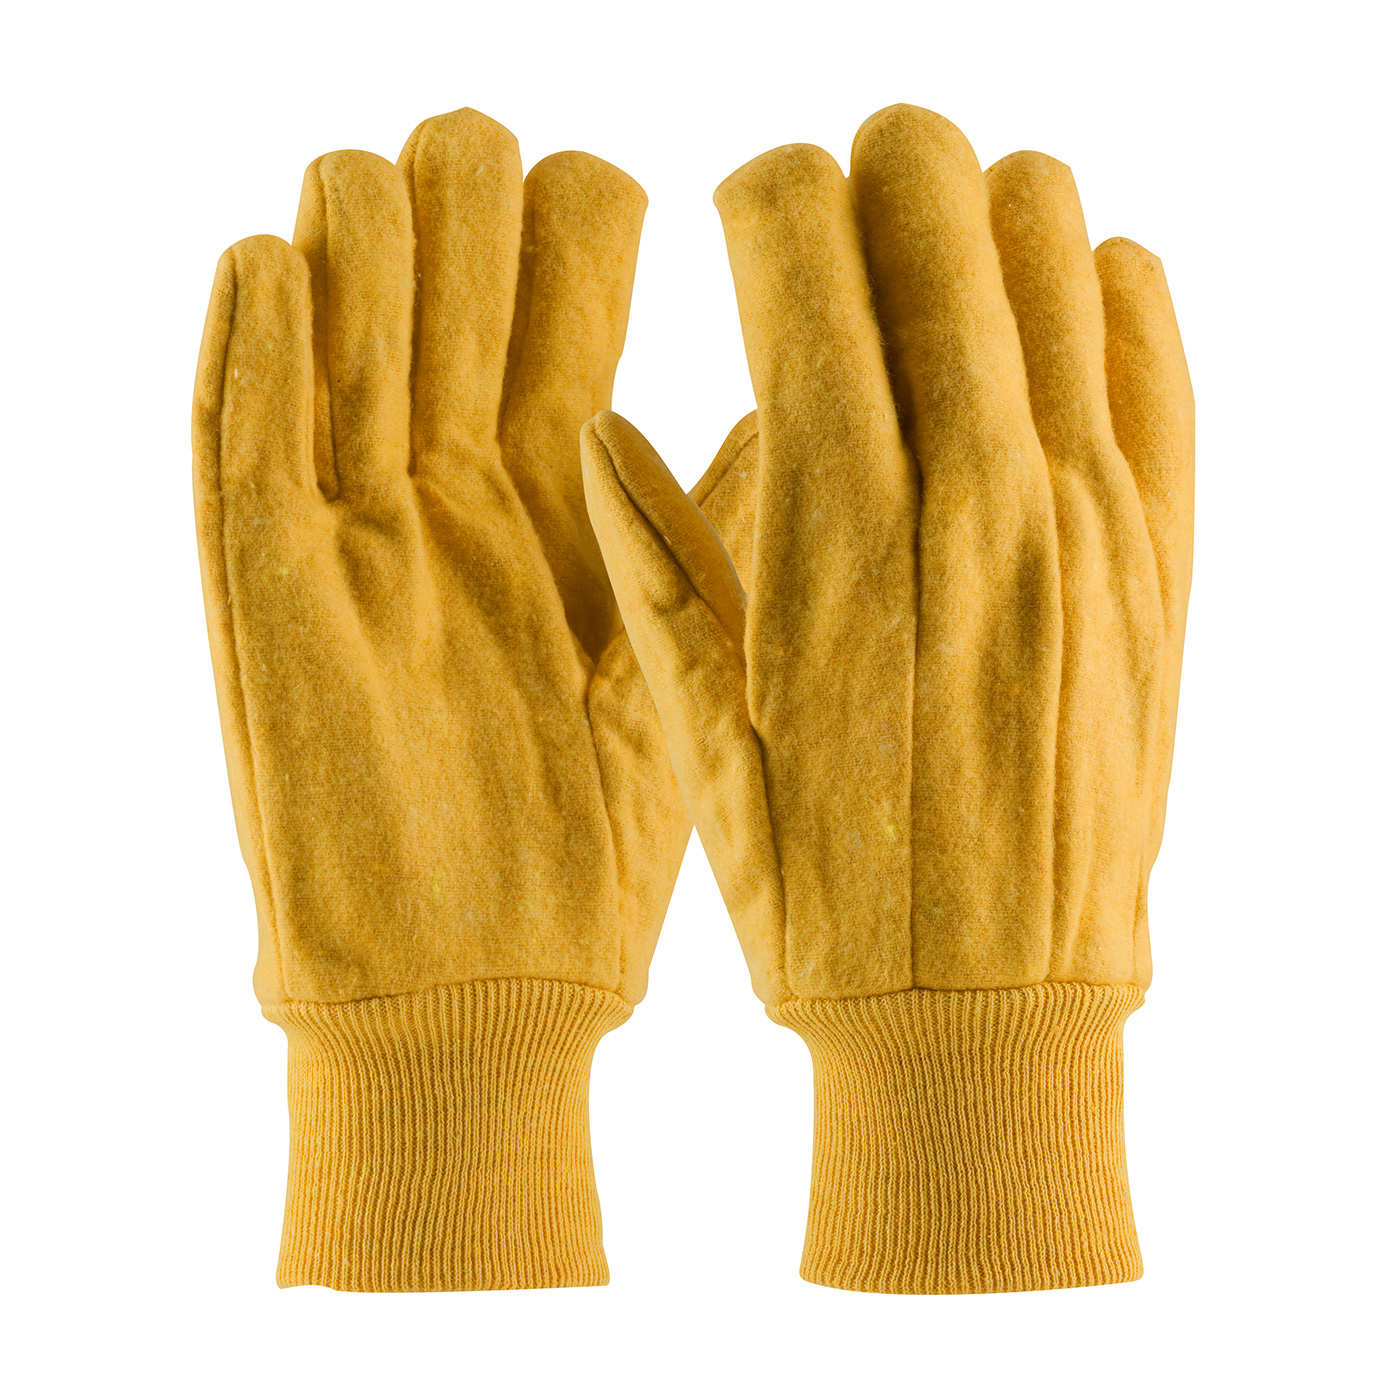 PIP Gold Economy Grade Single Layer Nap-out Finish Cotton Chore Gloves